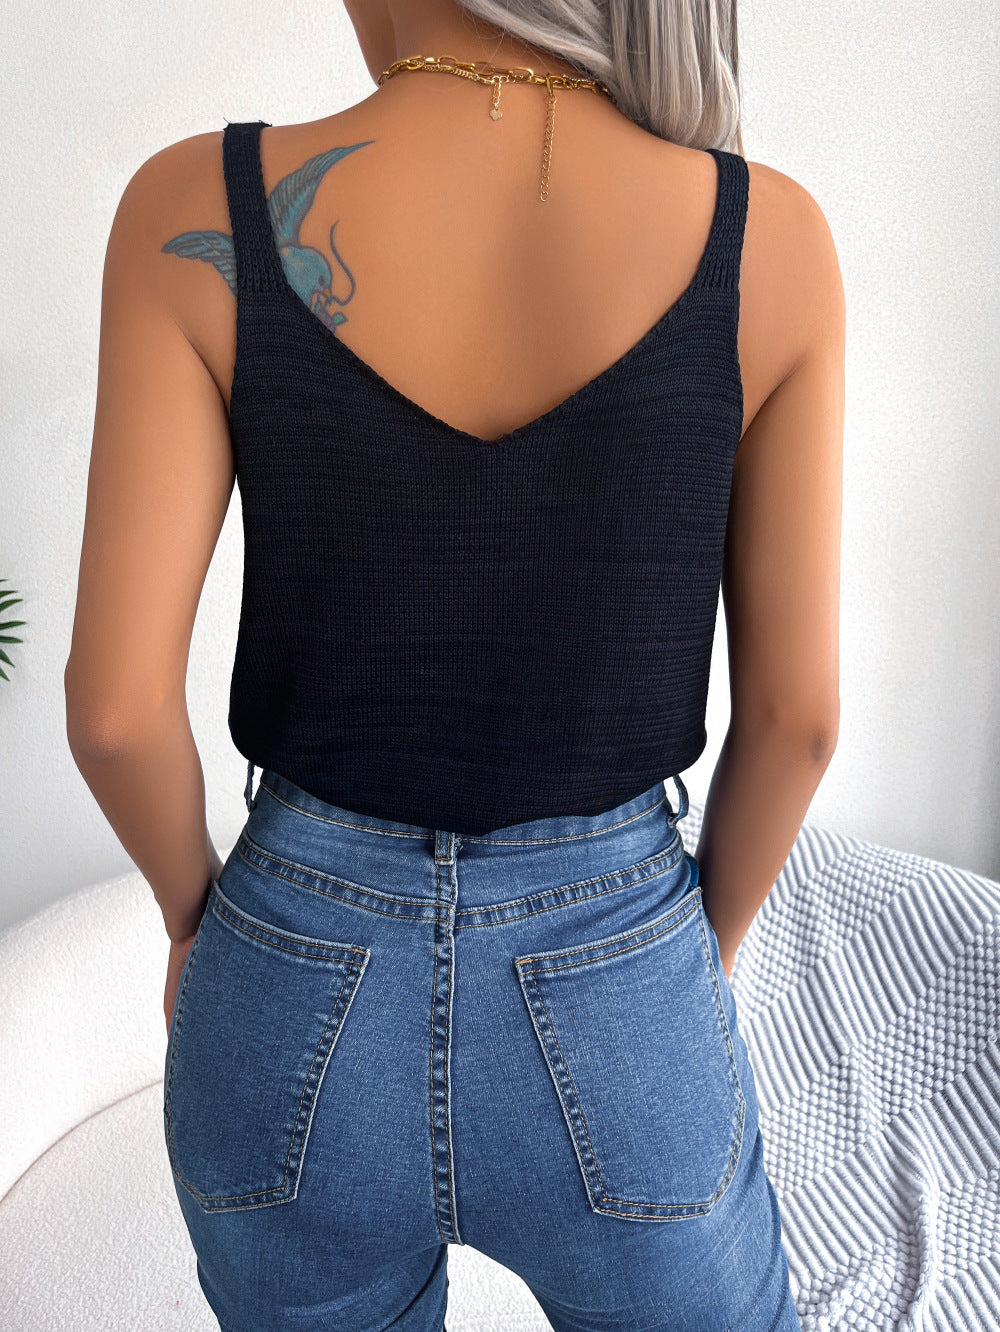 Openwork Scoop Neck Knit Tank Top free shipping -Oh Em Gee Boutique